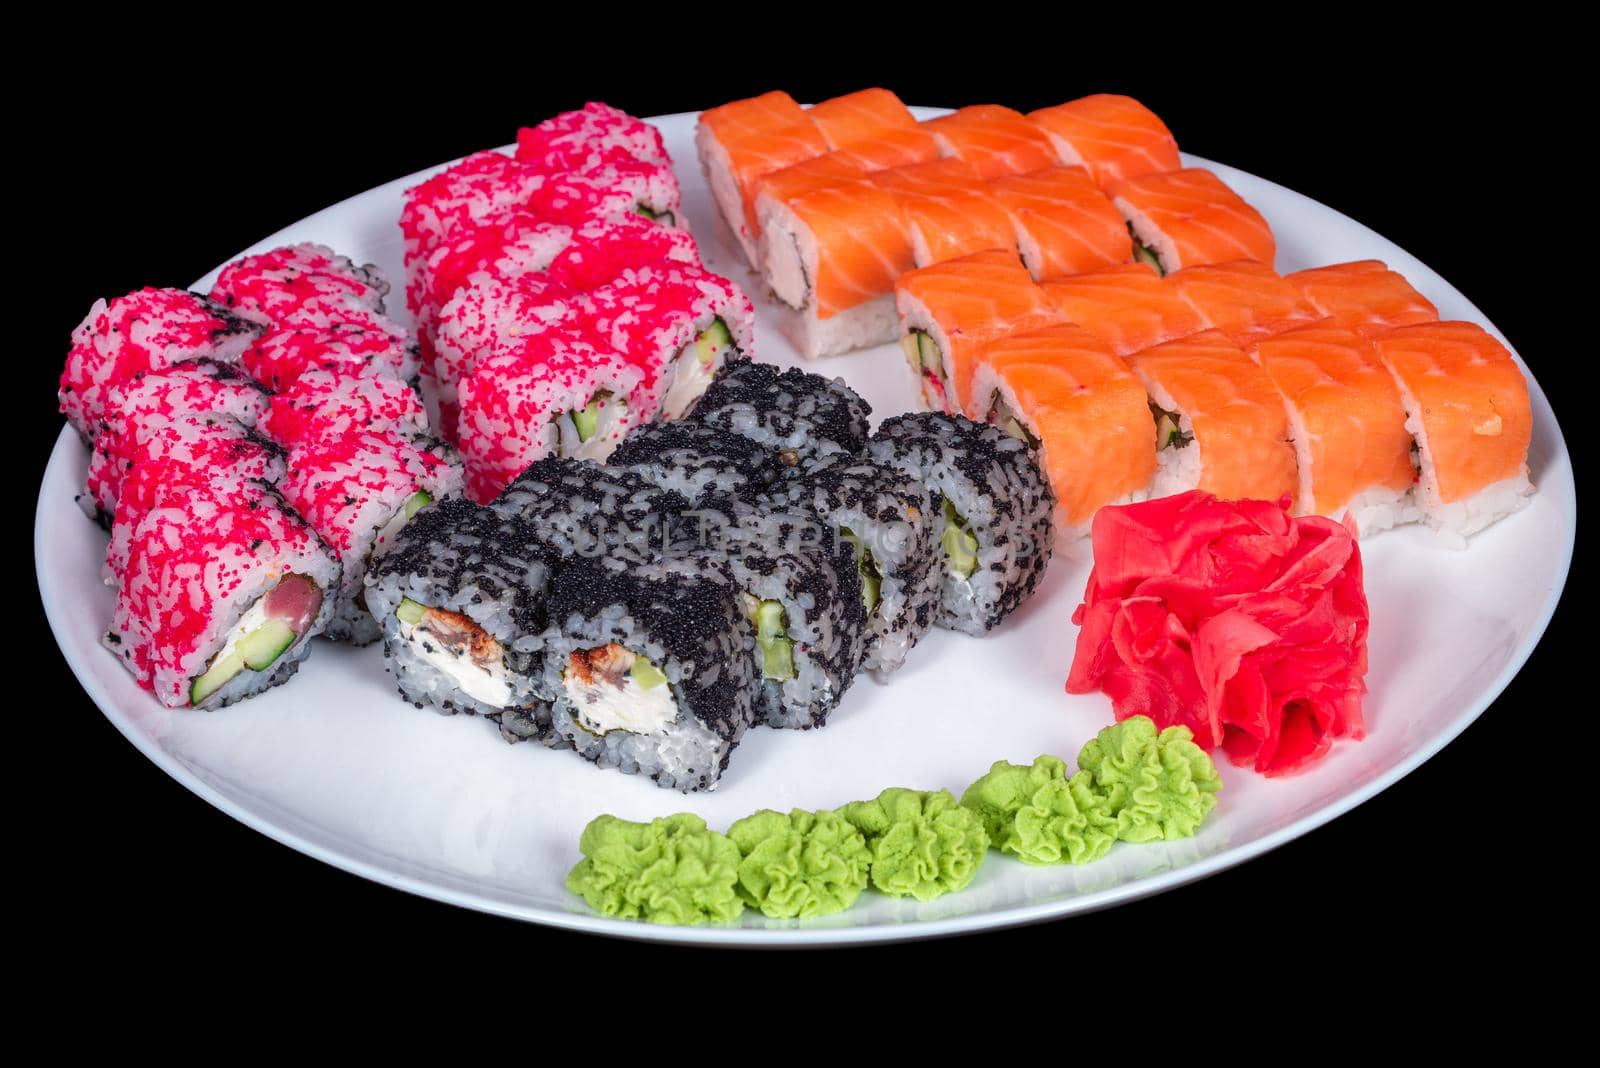 Japanese Cuisine - Sushi Roll with Shrimps and Conger, Avocado, Tobiko and Cheese. sushi rolls tempura,japanese food style ,Traditional Japanese cuisine, Crunchy Shrimp Tempura Roll by Andrii_Ko